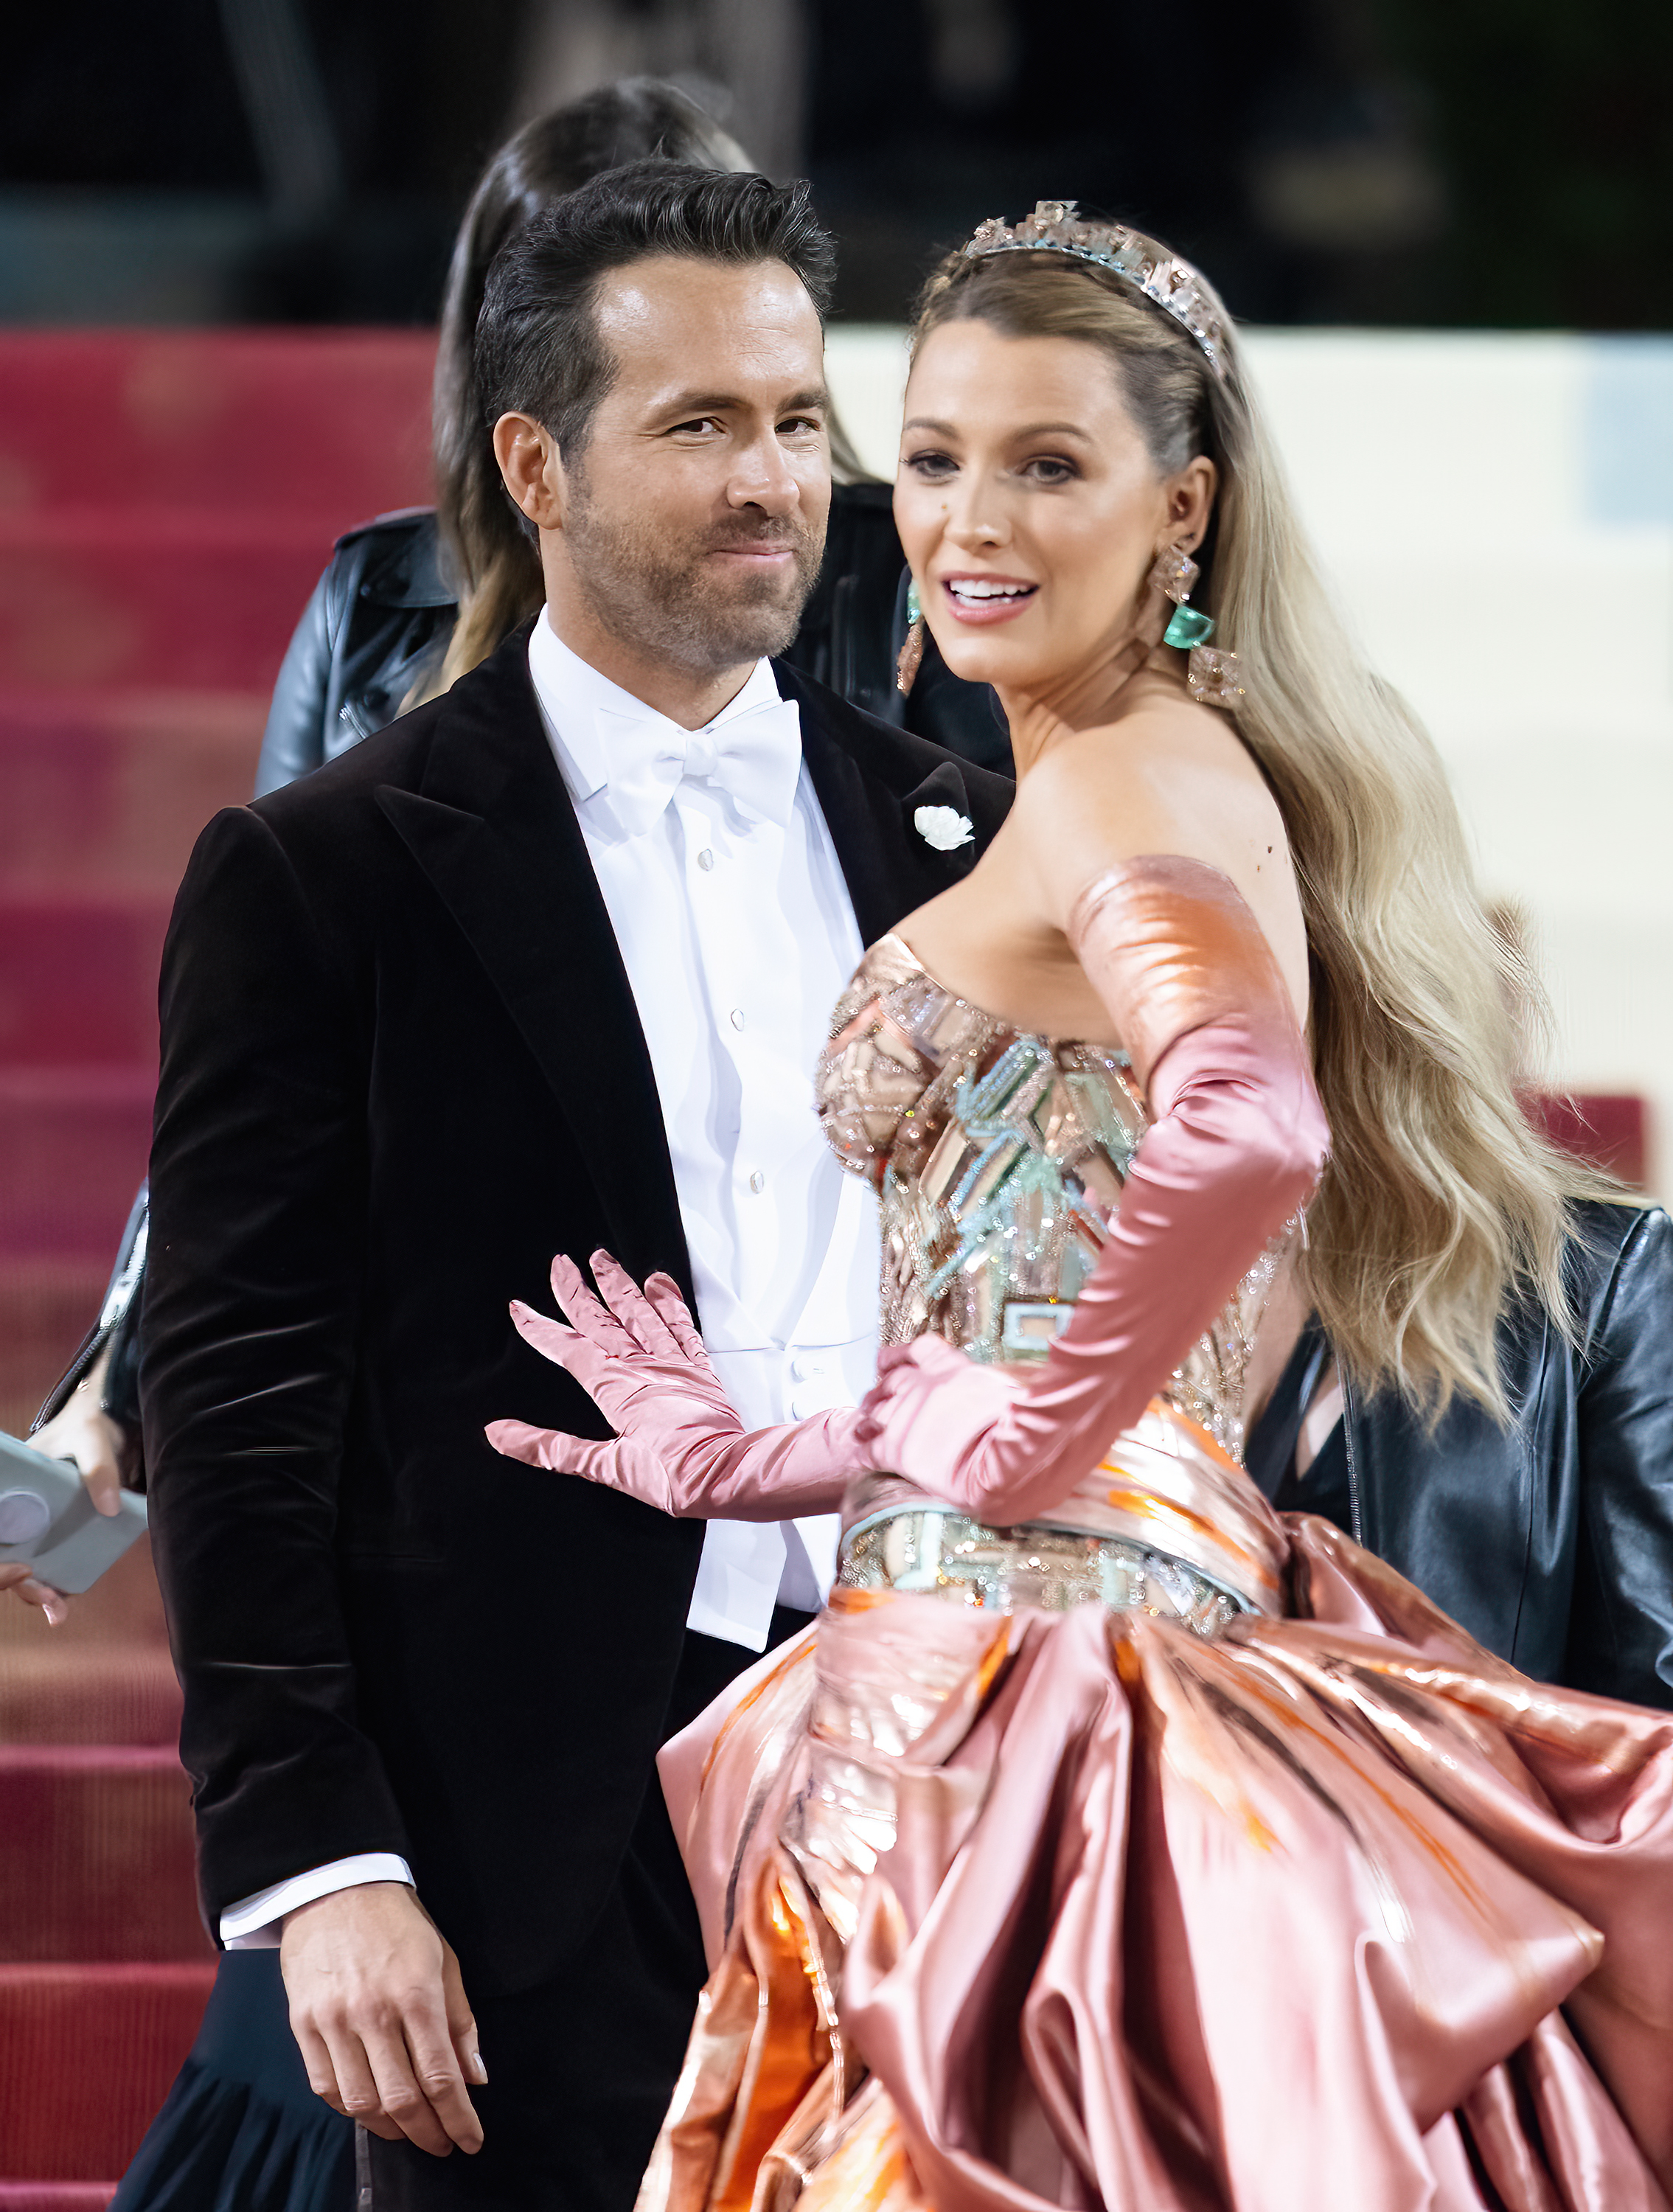 The couple on red carpet, Ryan in a tuxedo and Blake in ornate gown with tiara and gloves